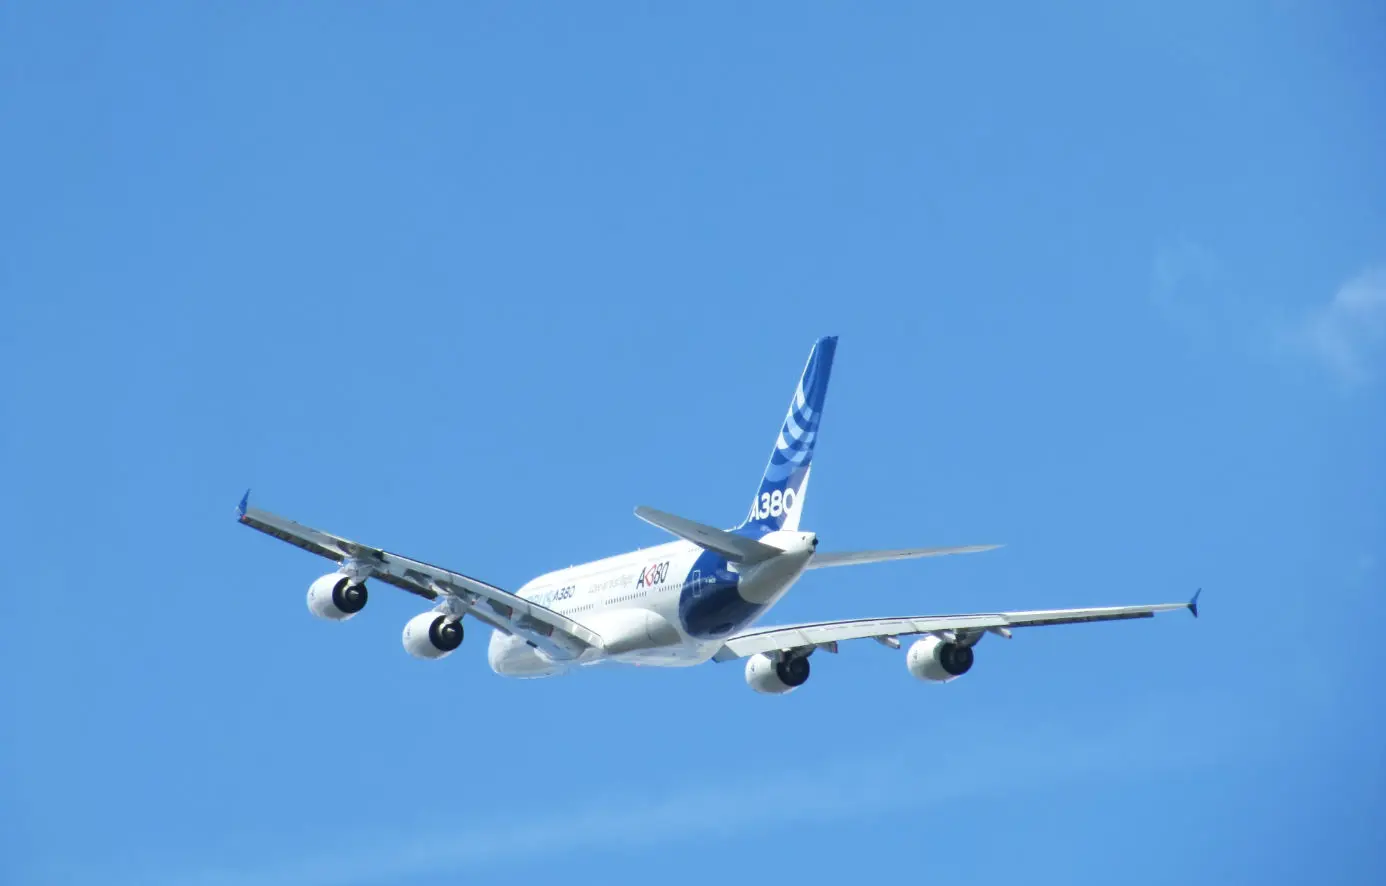 The Airbus A380 first flew in 2005